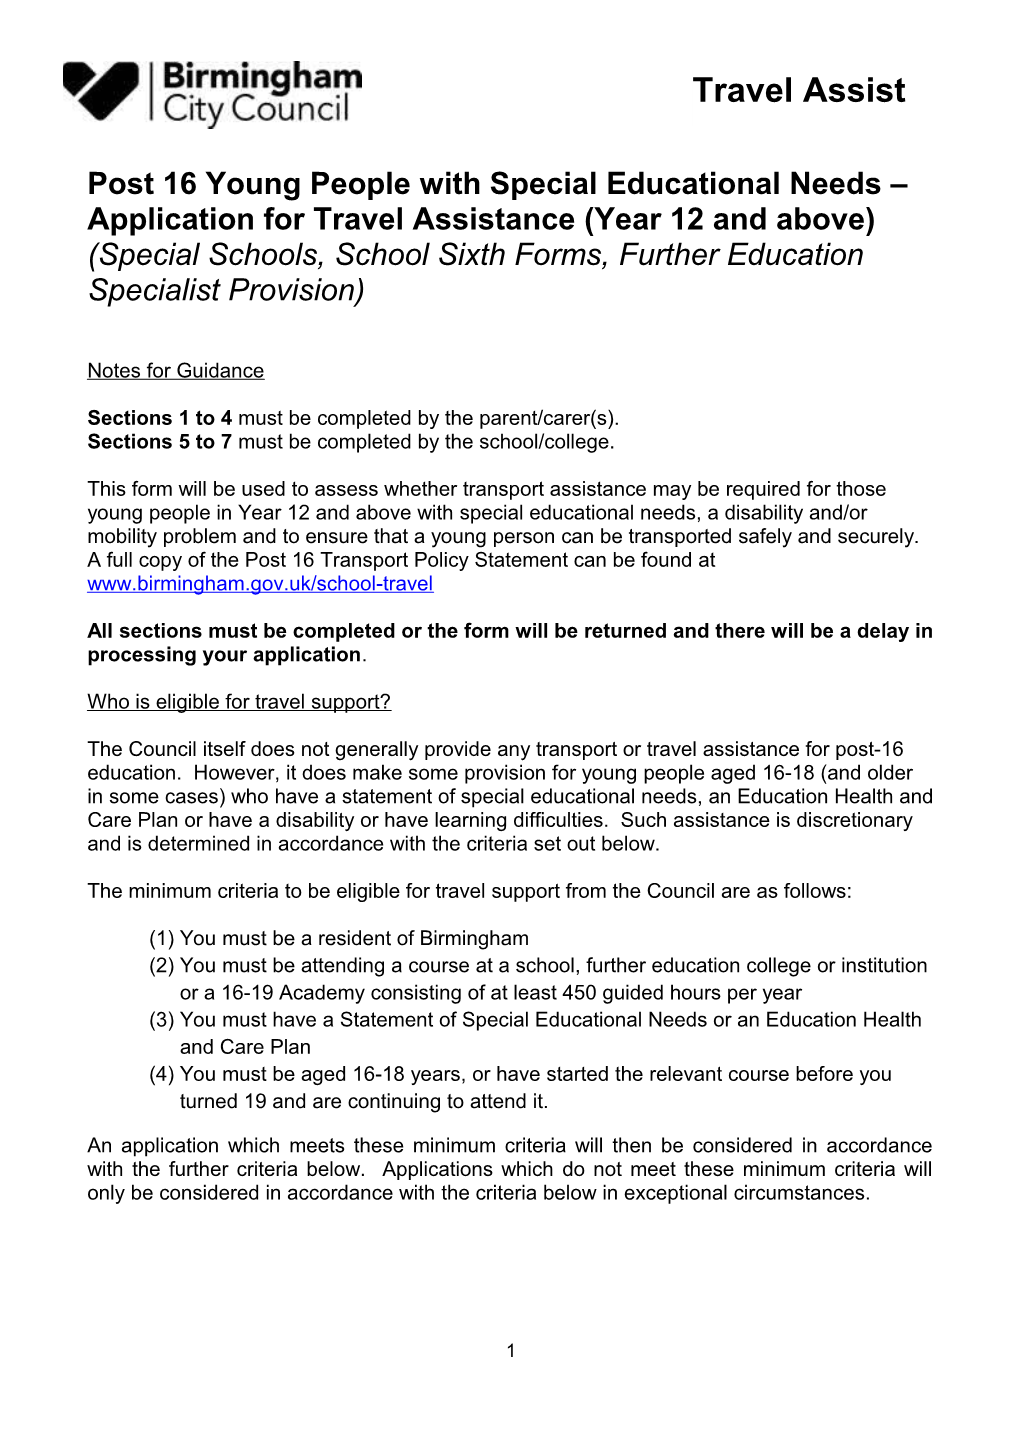 Specialschools, School Sixth Forms, Further Education Specialist Provision